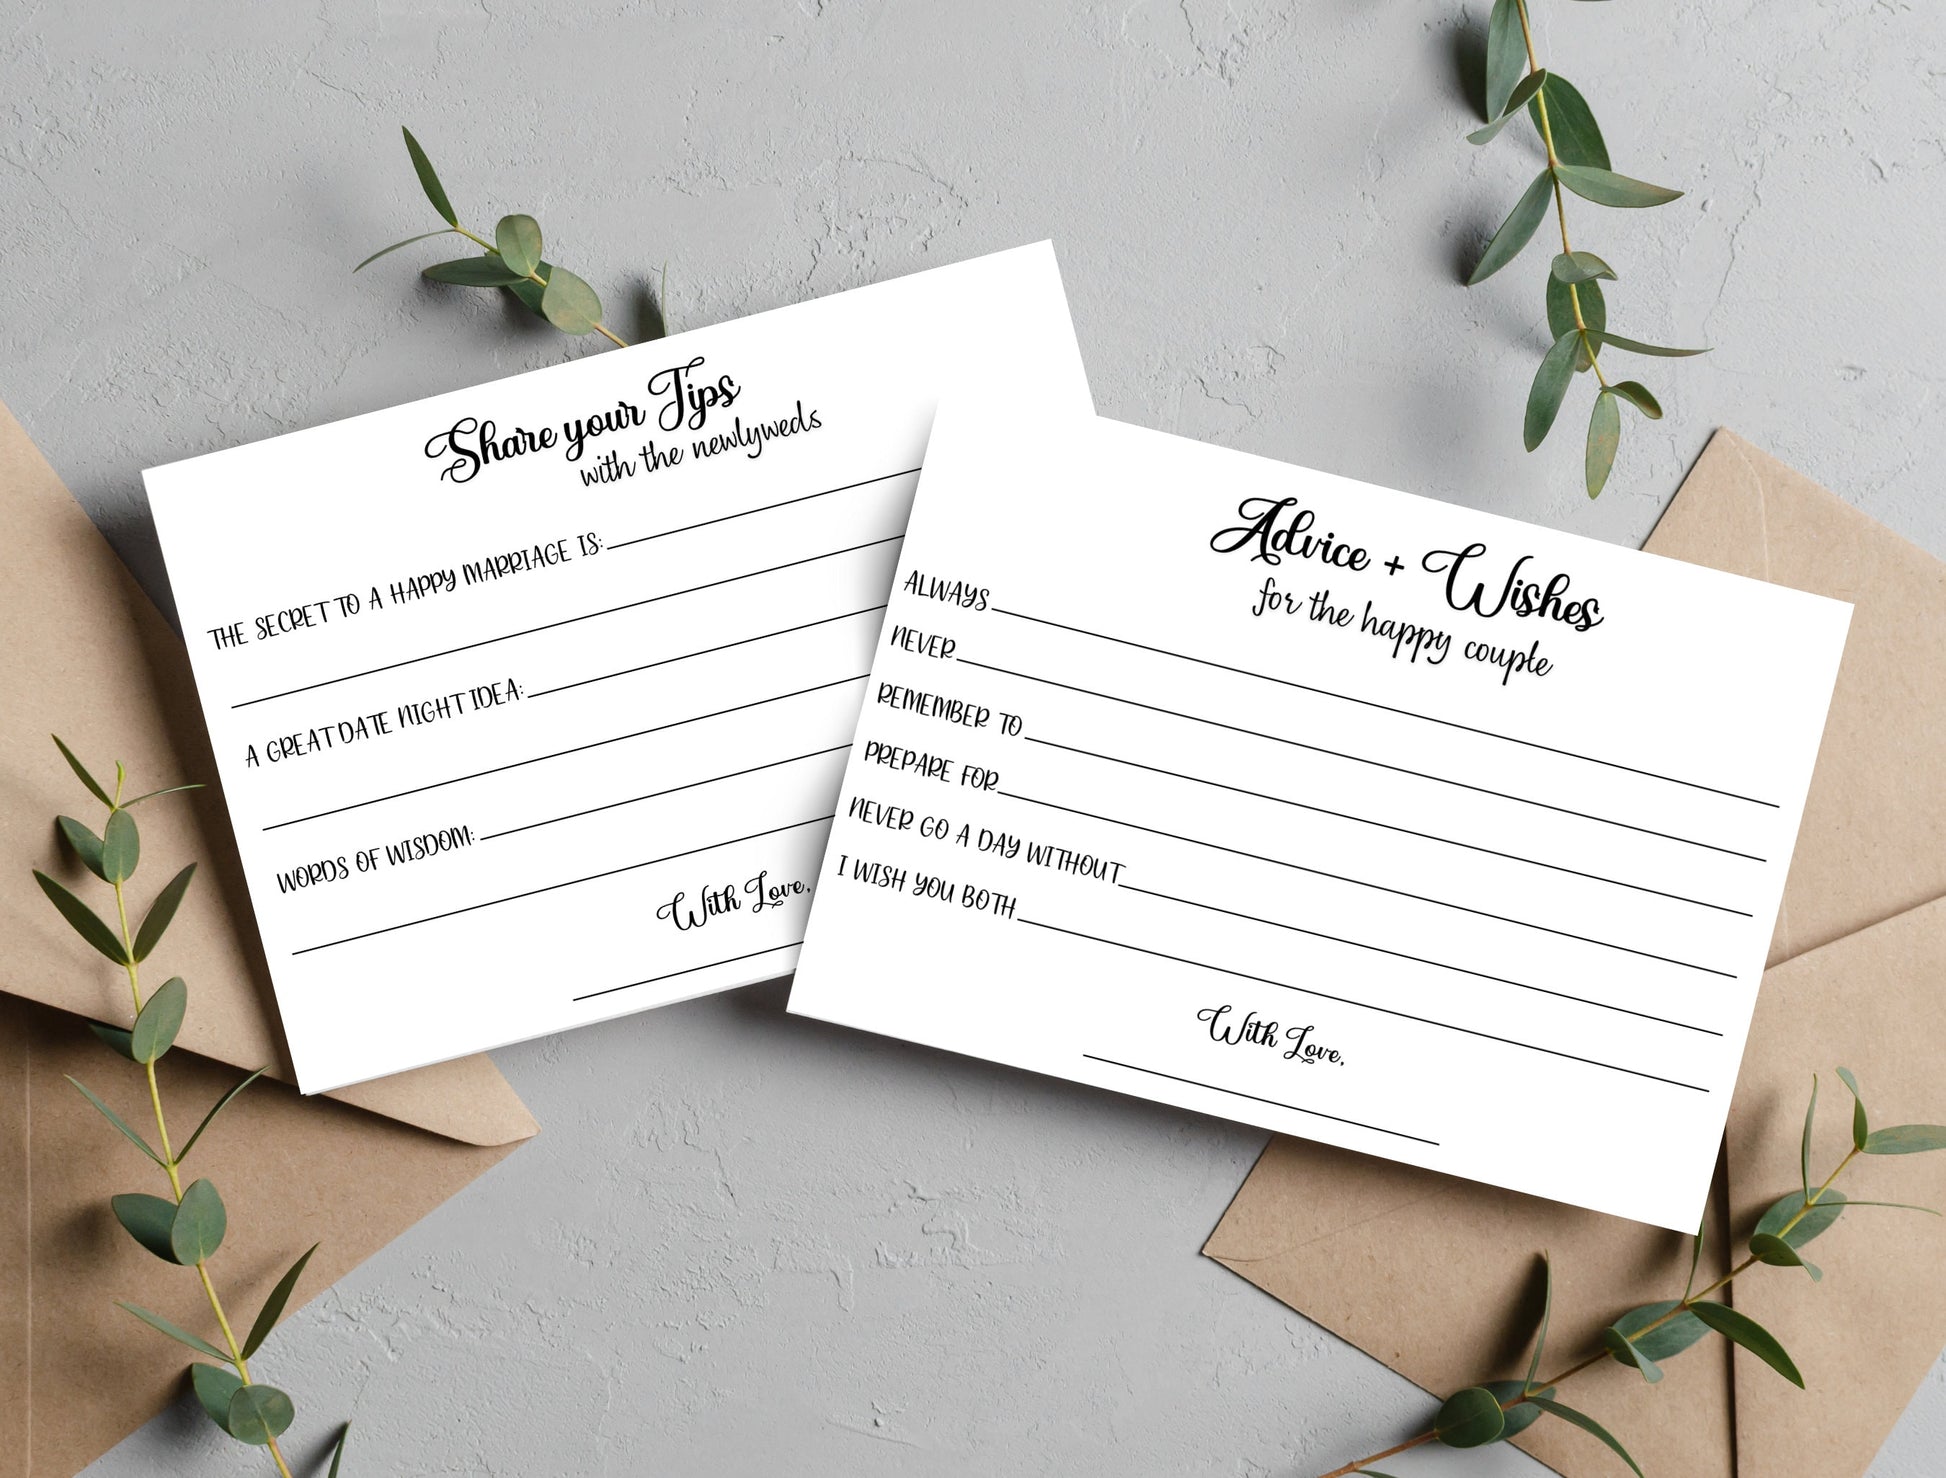 Wedding Advice And Wishes Card Printable, Minimalist Bridal Shower Party Game, Bride & Groom Wedding Shower, Couple Well Wishes Tip Jar Idea